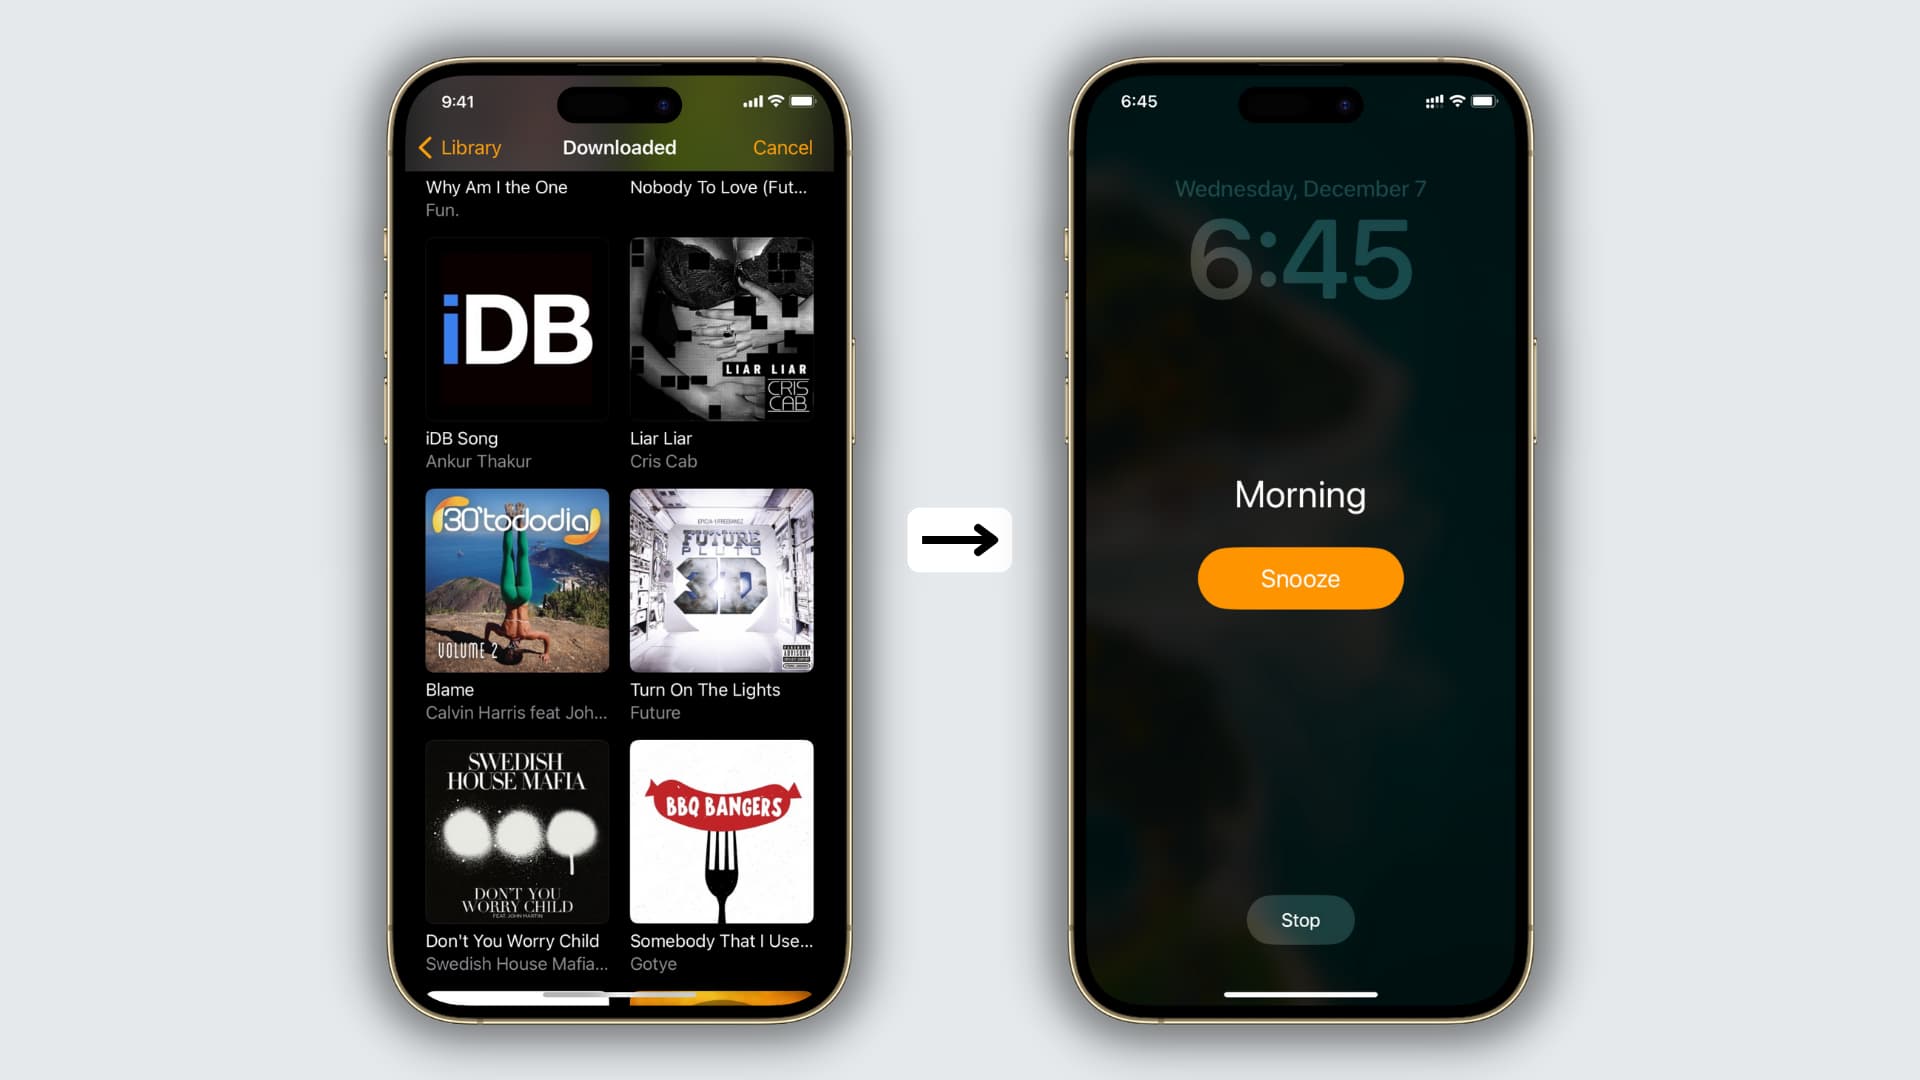 Set your favorite song as alarm tone on iPhone